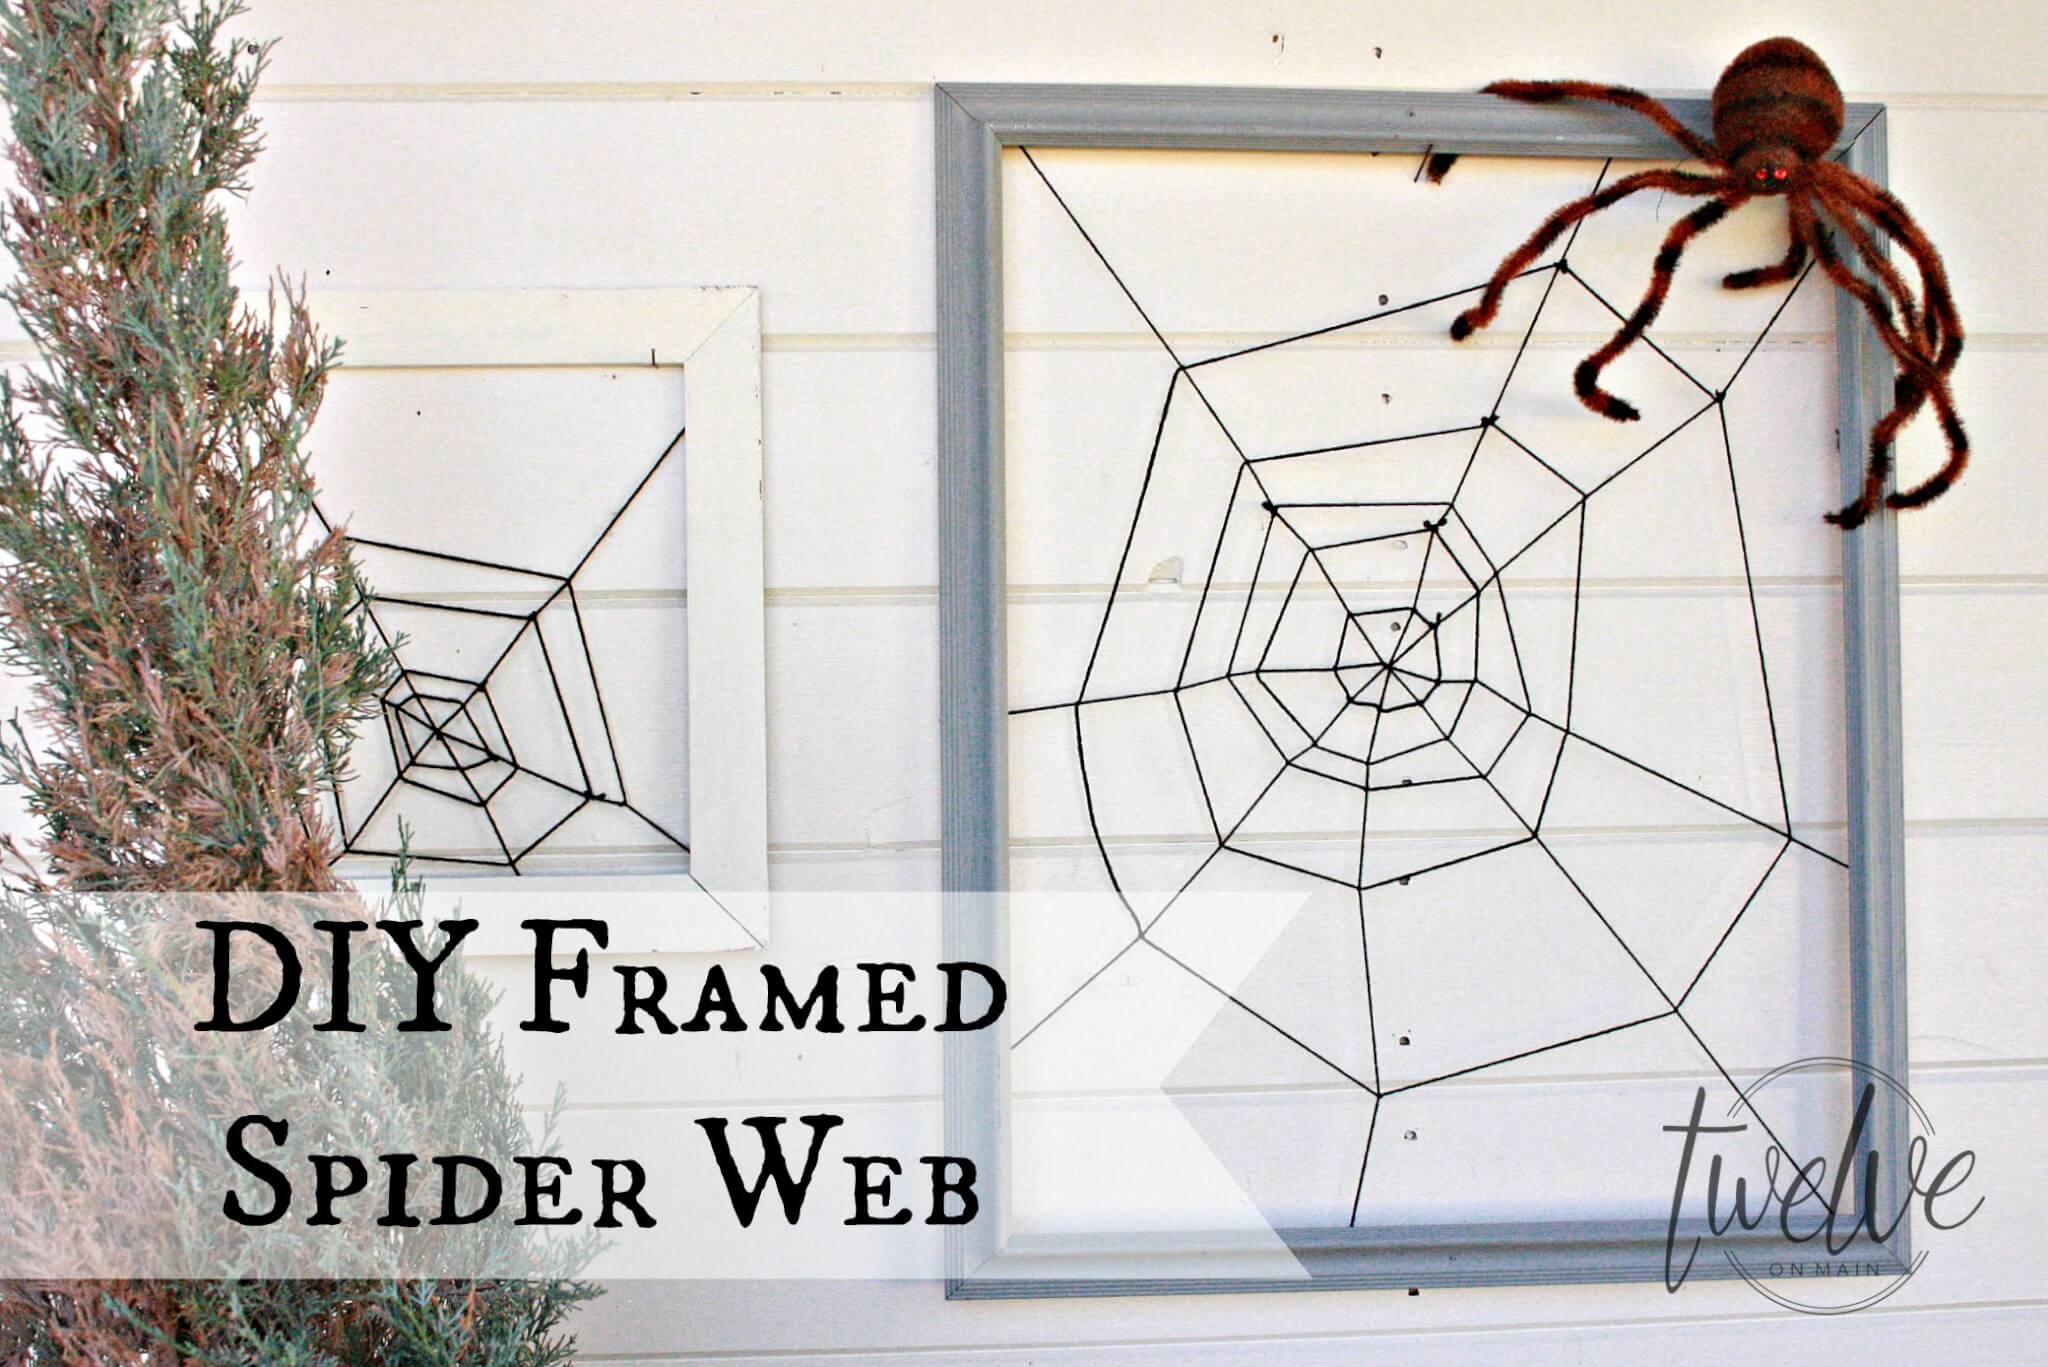 Thanks T for trusting us in this project and adding the spider to